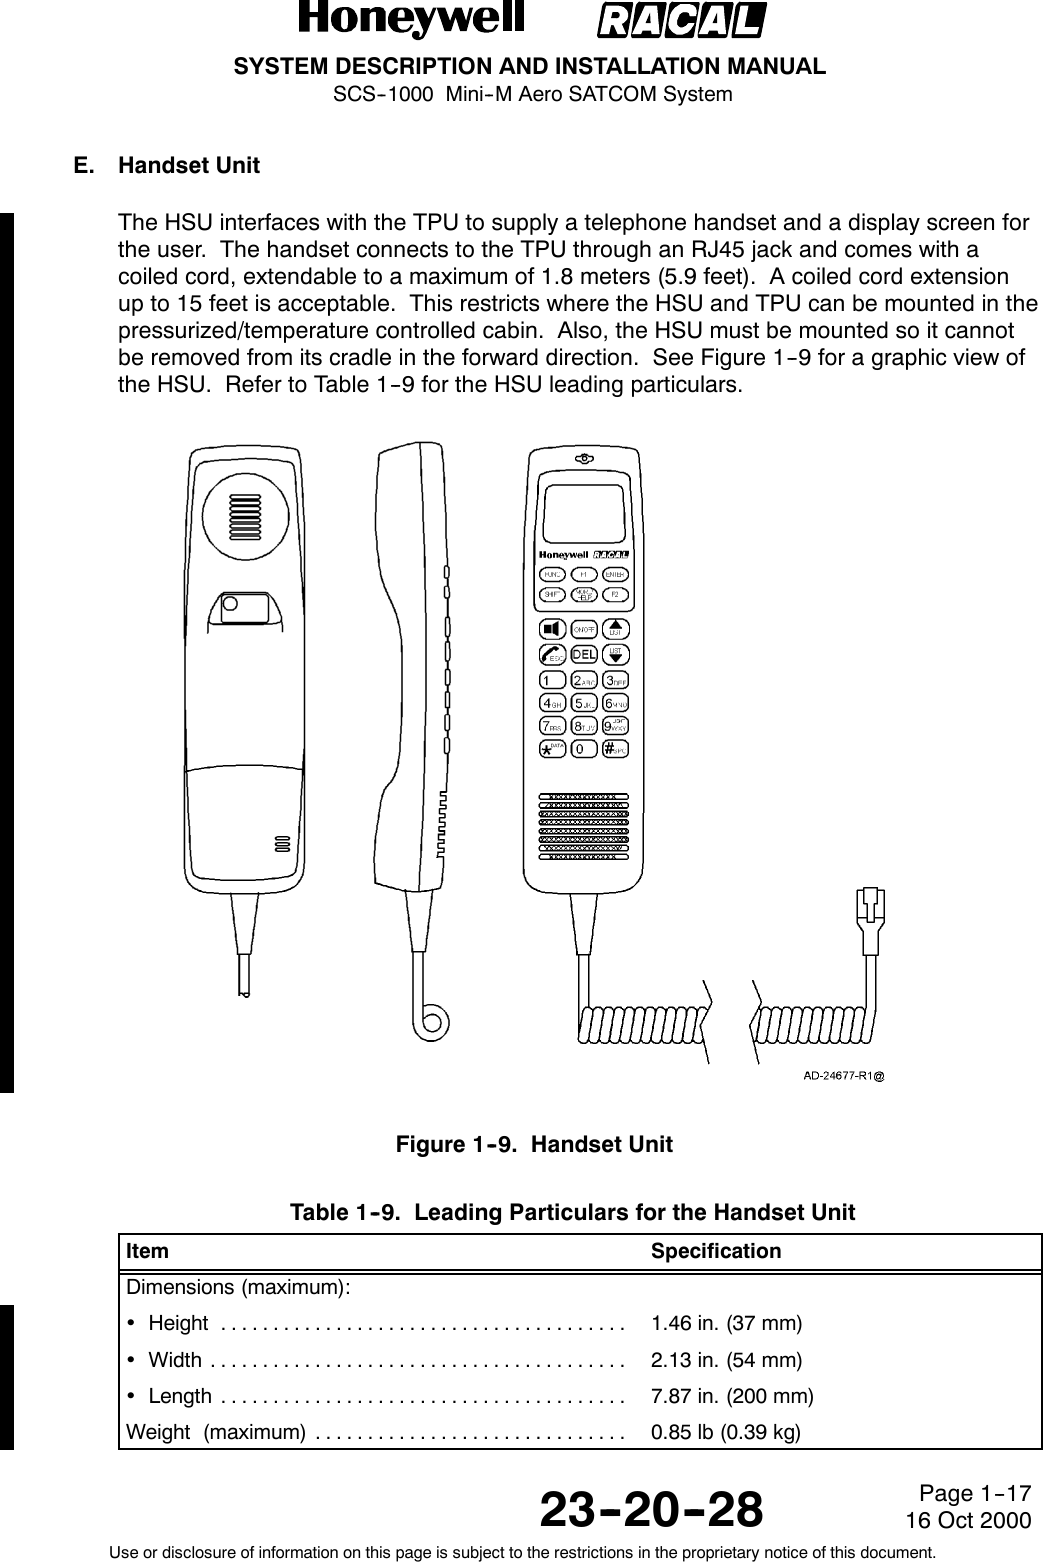 SYSTEM DESCRIPTION AND INSTALLATION MANUALSCS--1000 Mini--M Aero SATCOM System23--20--28Use or disclosure of information on this page is subject to the restrictions in the proprietary notice of this document.Page 1--1716 Oct 2000E. Handset UnitThe HSU interfaces with the TPU to supply a telephone handset and a display screen forthe user. The handset connects to the TPU through an RJ45 jack and comes with acoiled cord, extendable to a maximum of 1.8 meters (5.9 feet). A coiled cord extensionup to 15 feet is acceptable. This restricts where the HSU and TPU can be mounted in thepressurized/temperature controlled cabin. Also, the HSU must be mounted so it cannotbe removed from its cradle in the forward direction. See Figure 1--9 for a graphic view ofthe HSU. Refer to Table 1--9 for the HSU leading particulars.Figure 1--9. Handset UnitTable 1--9. Leading Particulars for the Handset UnitItem SpecificationDimensions (maximum):Height ....................................... 1.46 in. (37 mm)Width ........................................ 2.13 in. (54 mm)Length ....................................... 7.87 in. (200 mm)Weight (maximum) .............................. 0.85 lb (0.39 kg)